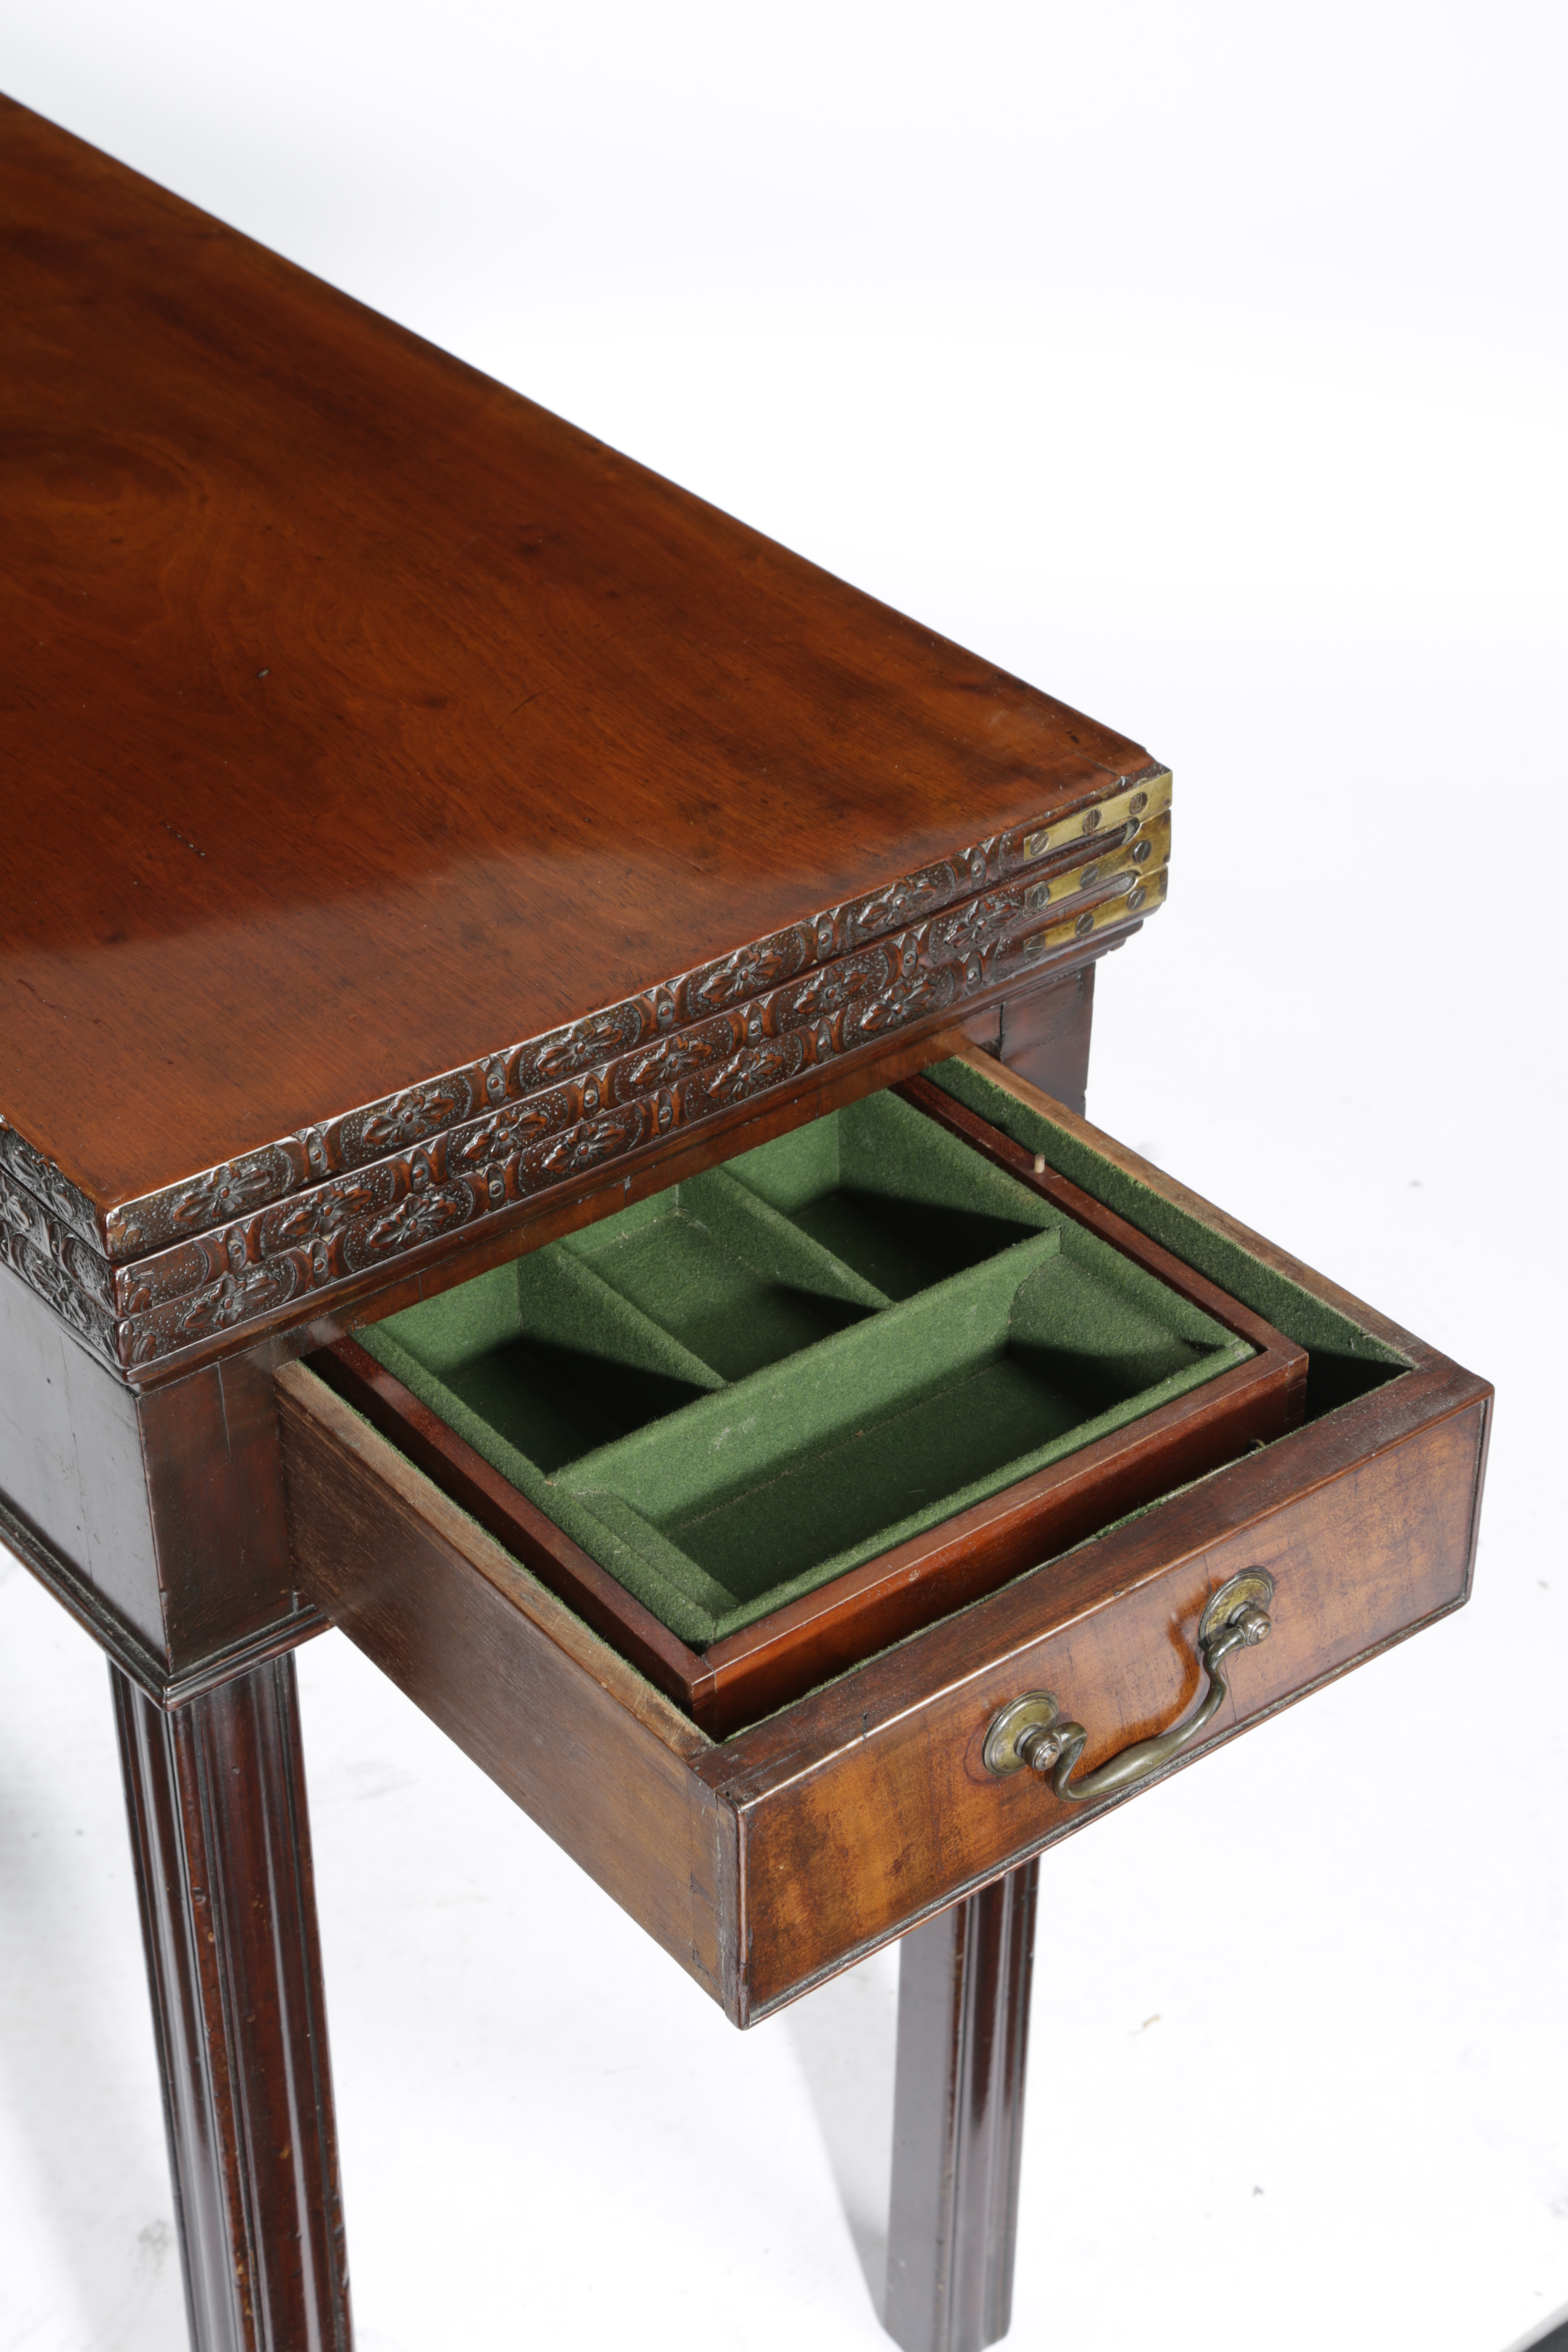 AN EARLY GEORGE III MAHOGANY COMBINED GAMES AND TEA TABLE C.1760 the triple fold-over top with a - Image 3 of 3